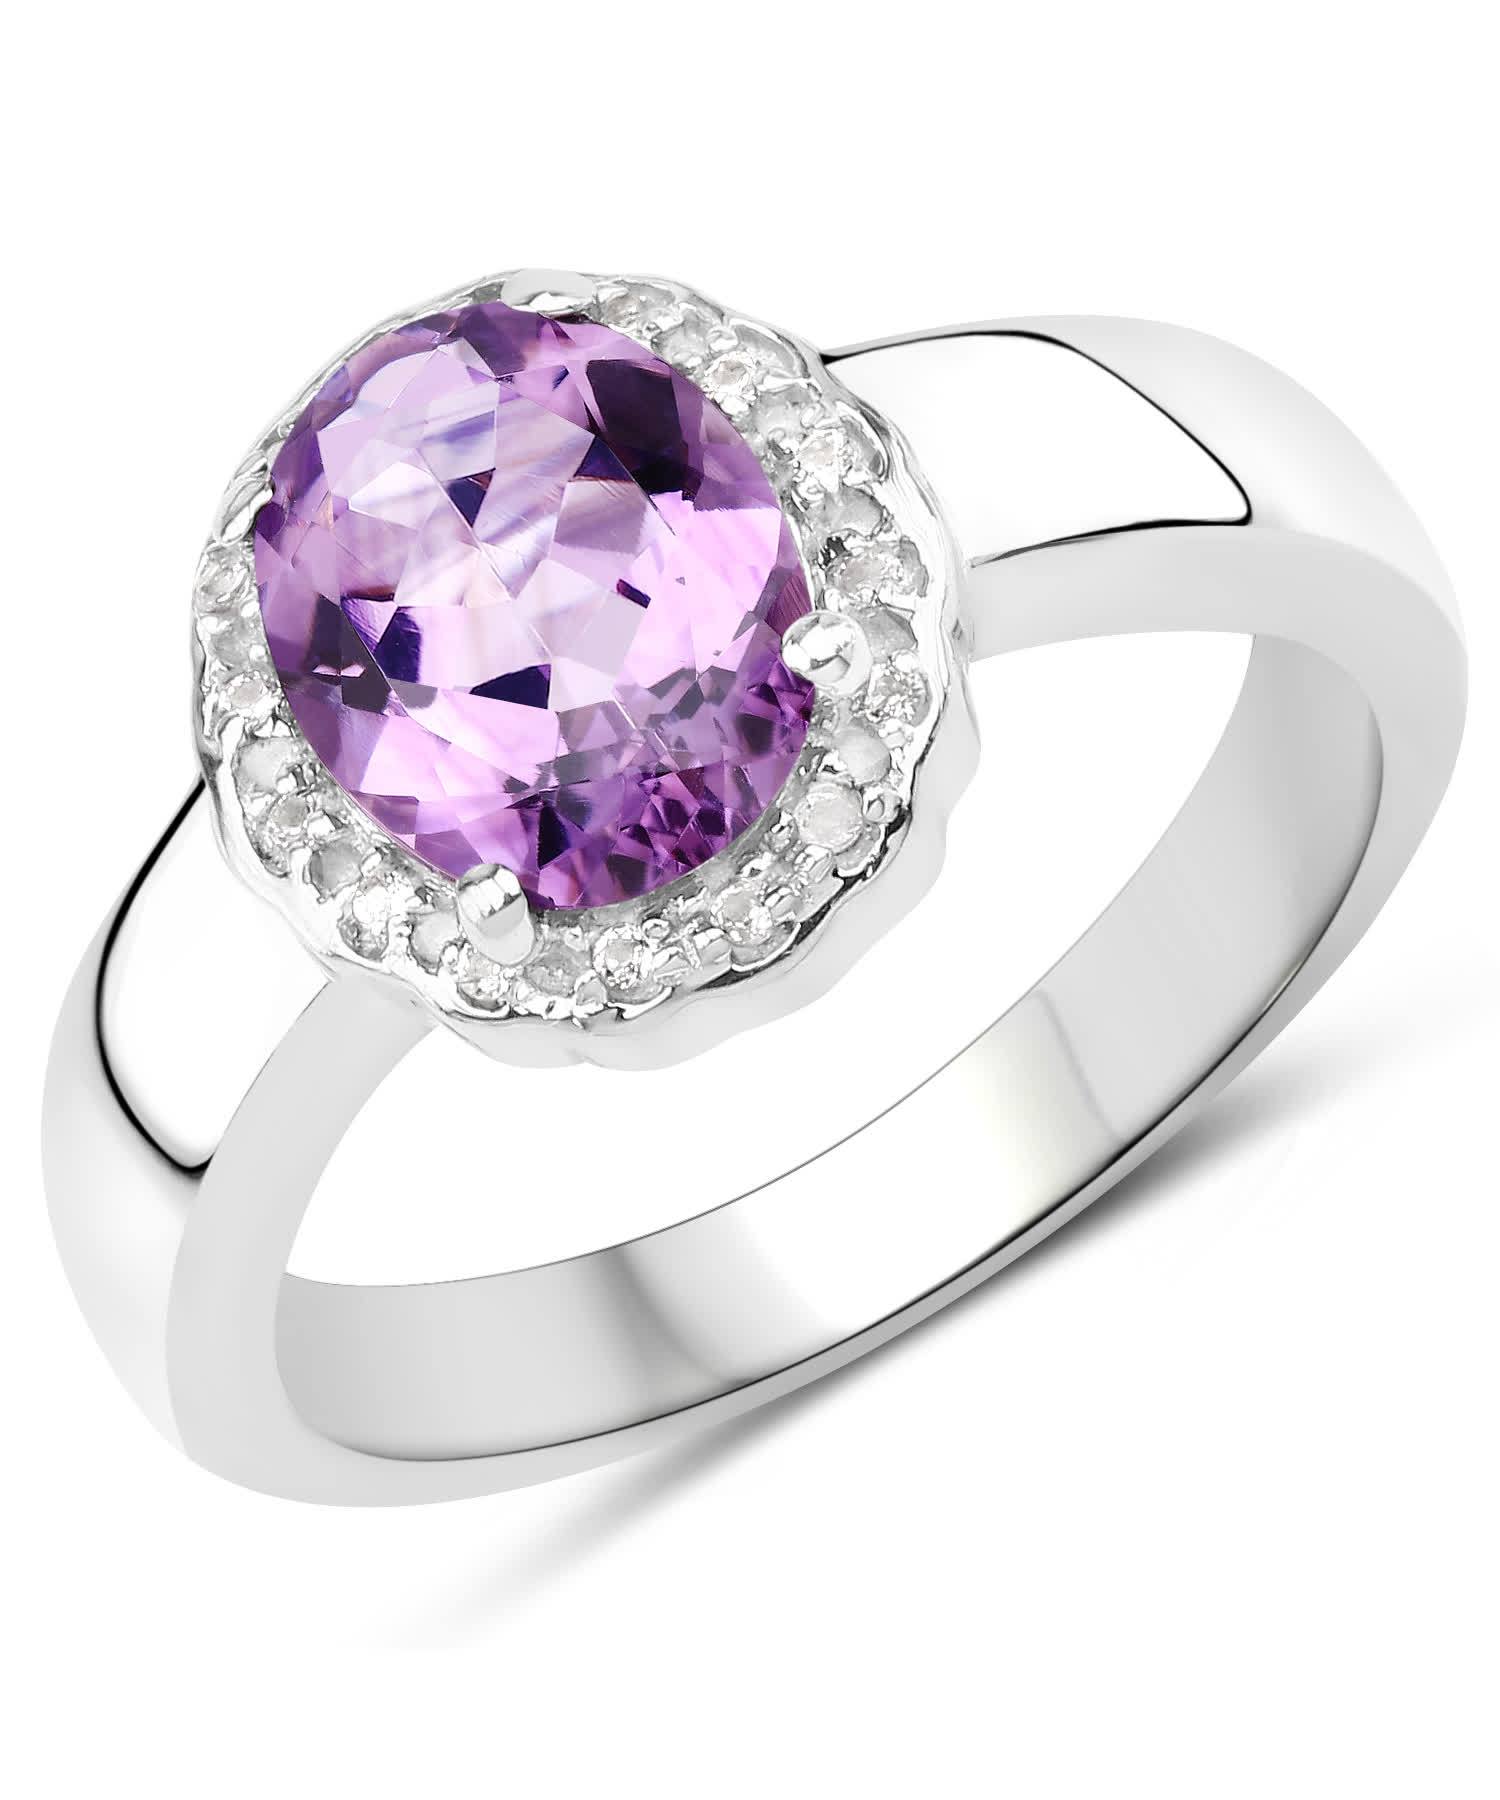 1.68ctw Natural Amethyst and Topaz Rhodium Plated 925 Sterling Silver Ring View 1